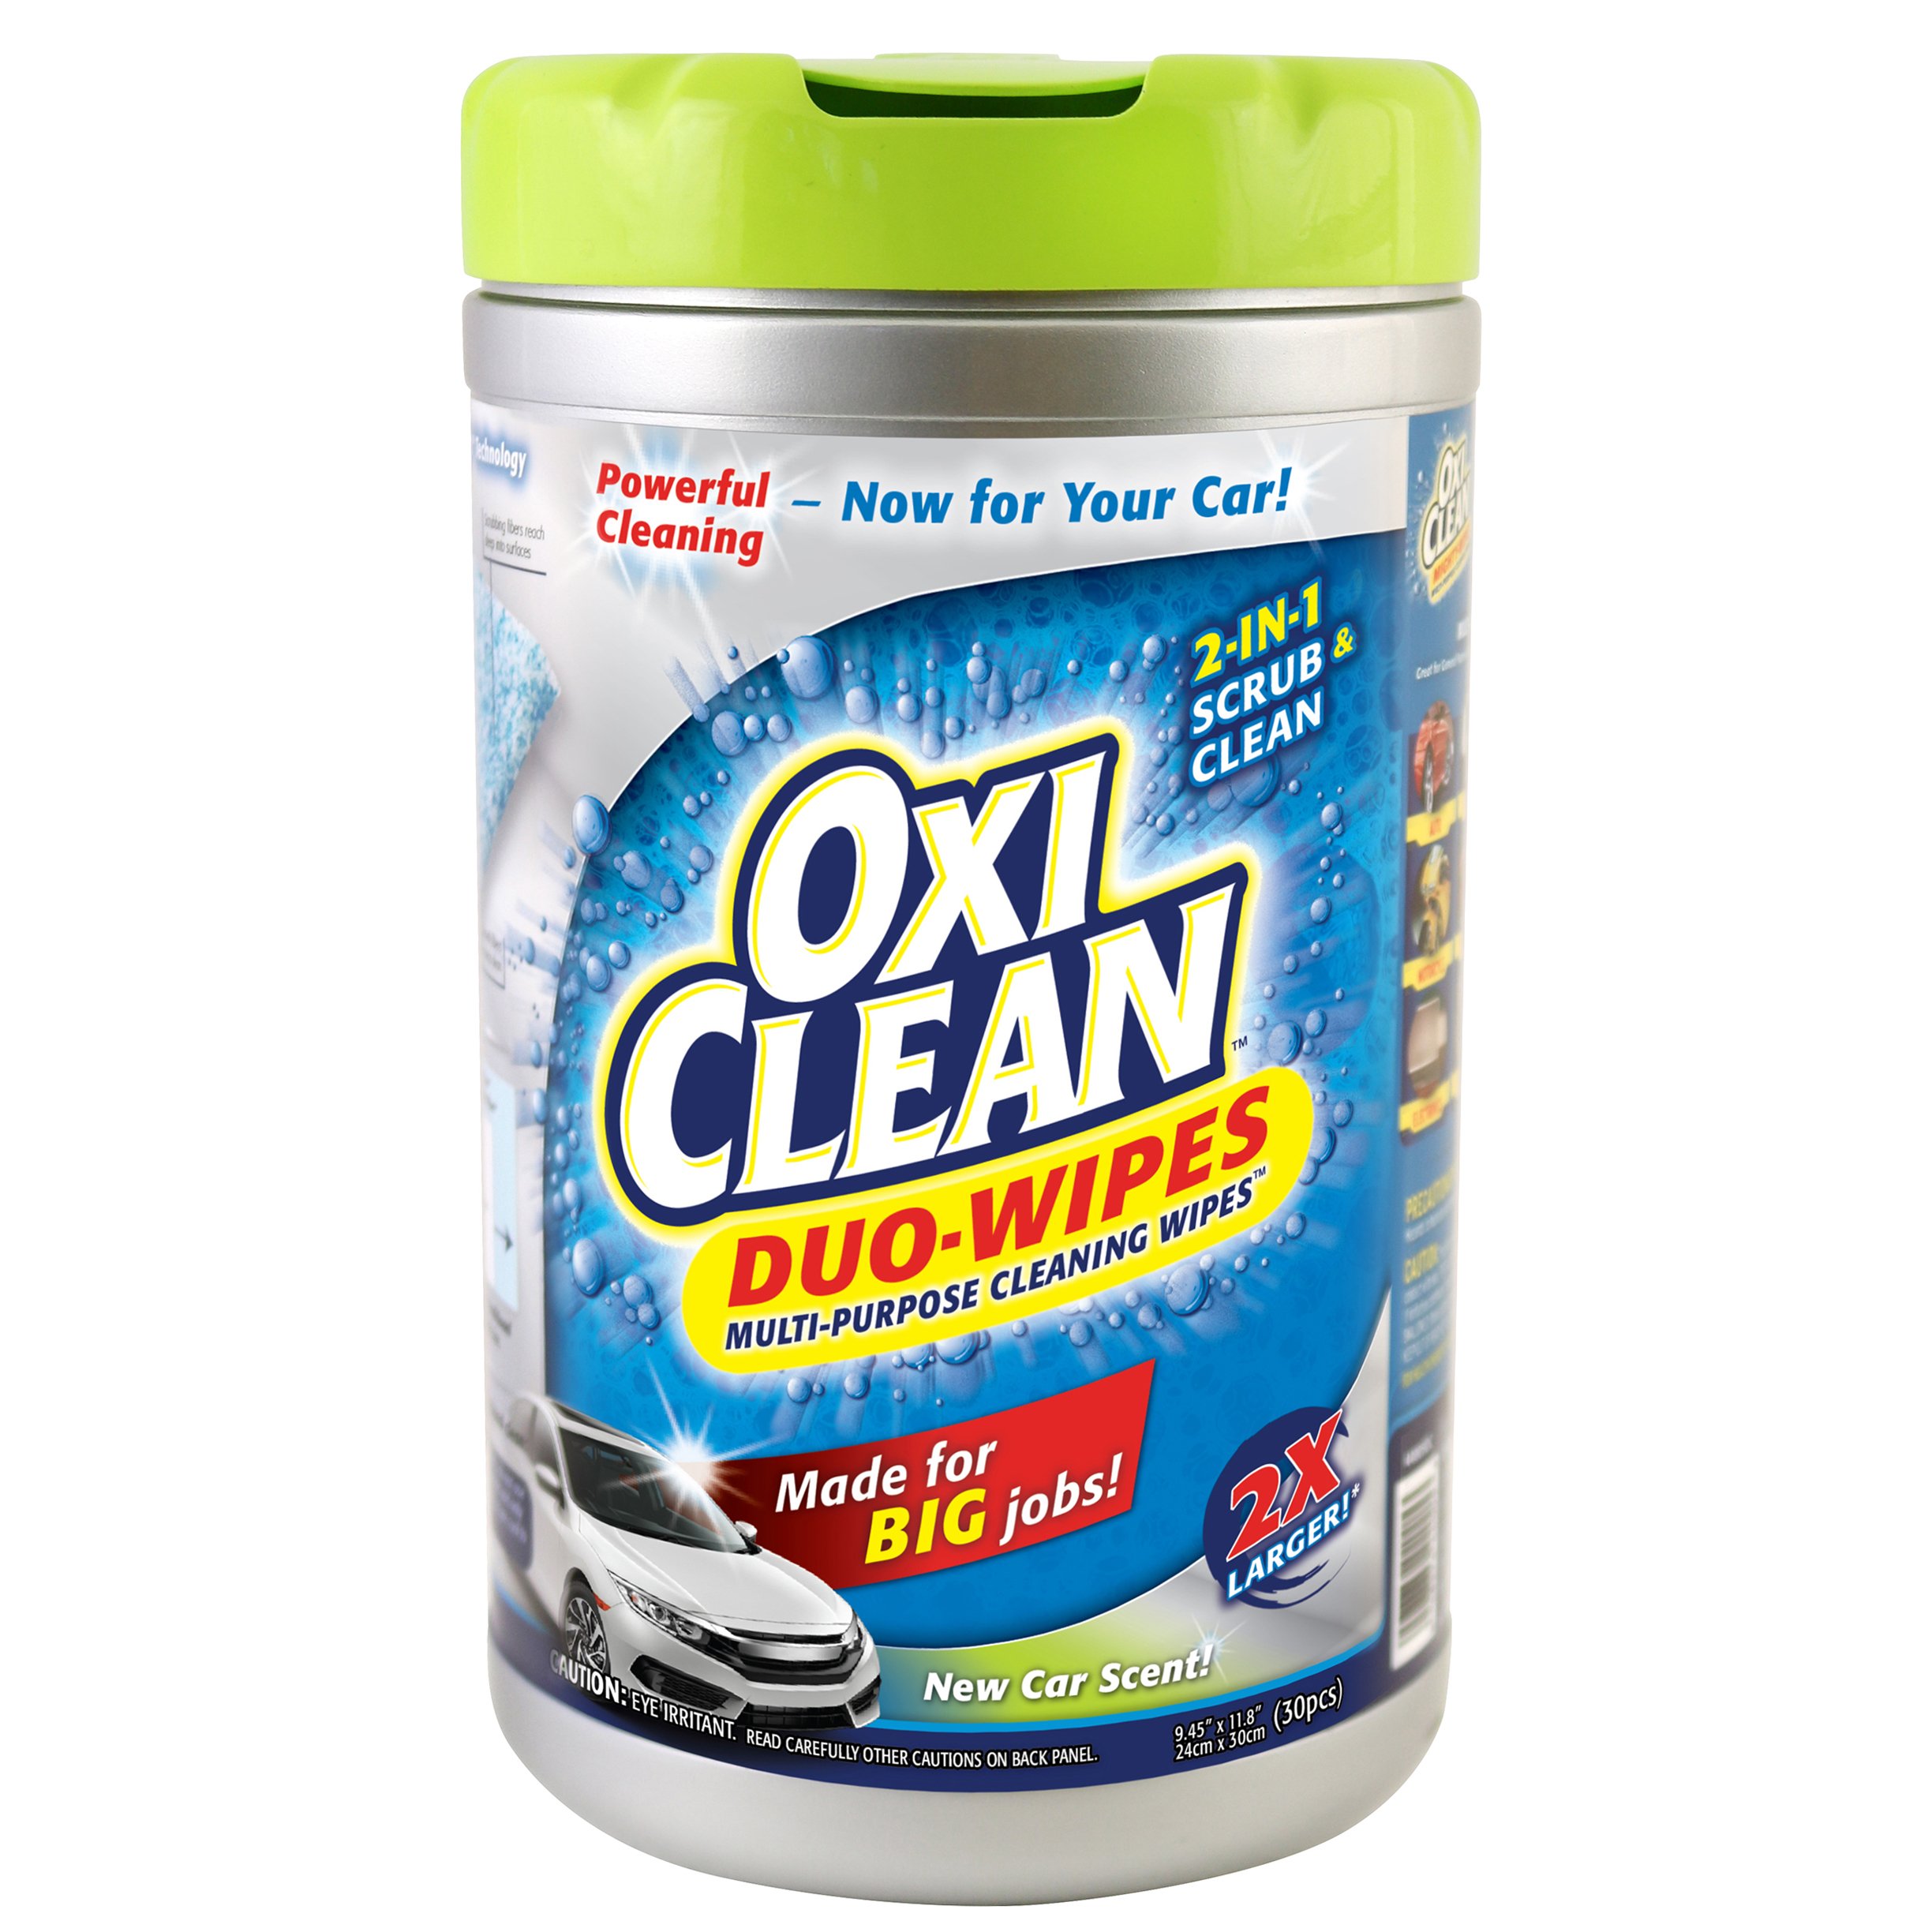 OxiClean Duo Multi-Purpose Cleaning Wipes - Shop Automotive Cleaners at  H-E-B